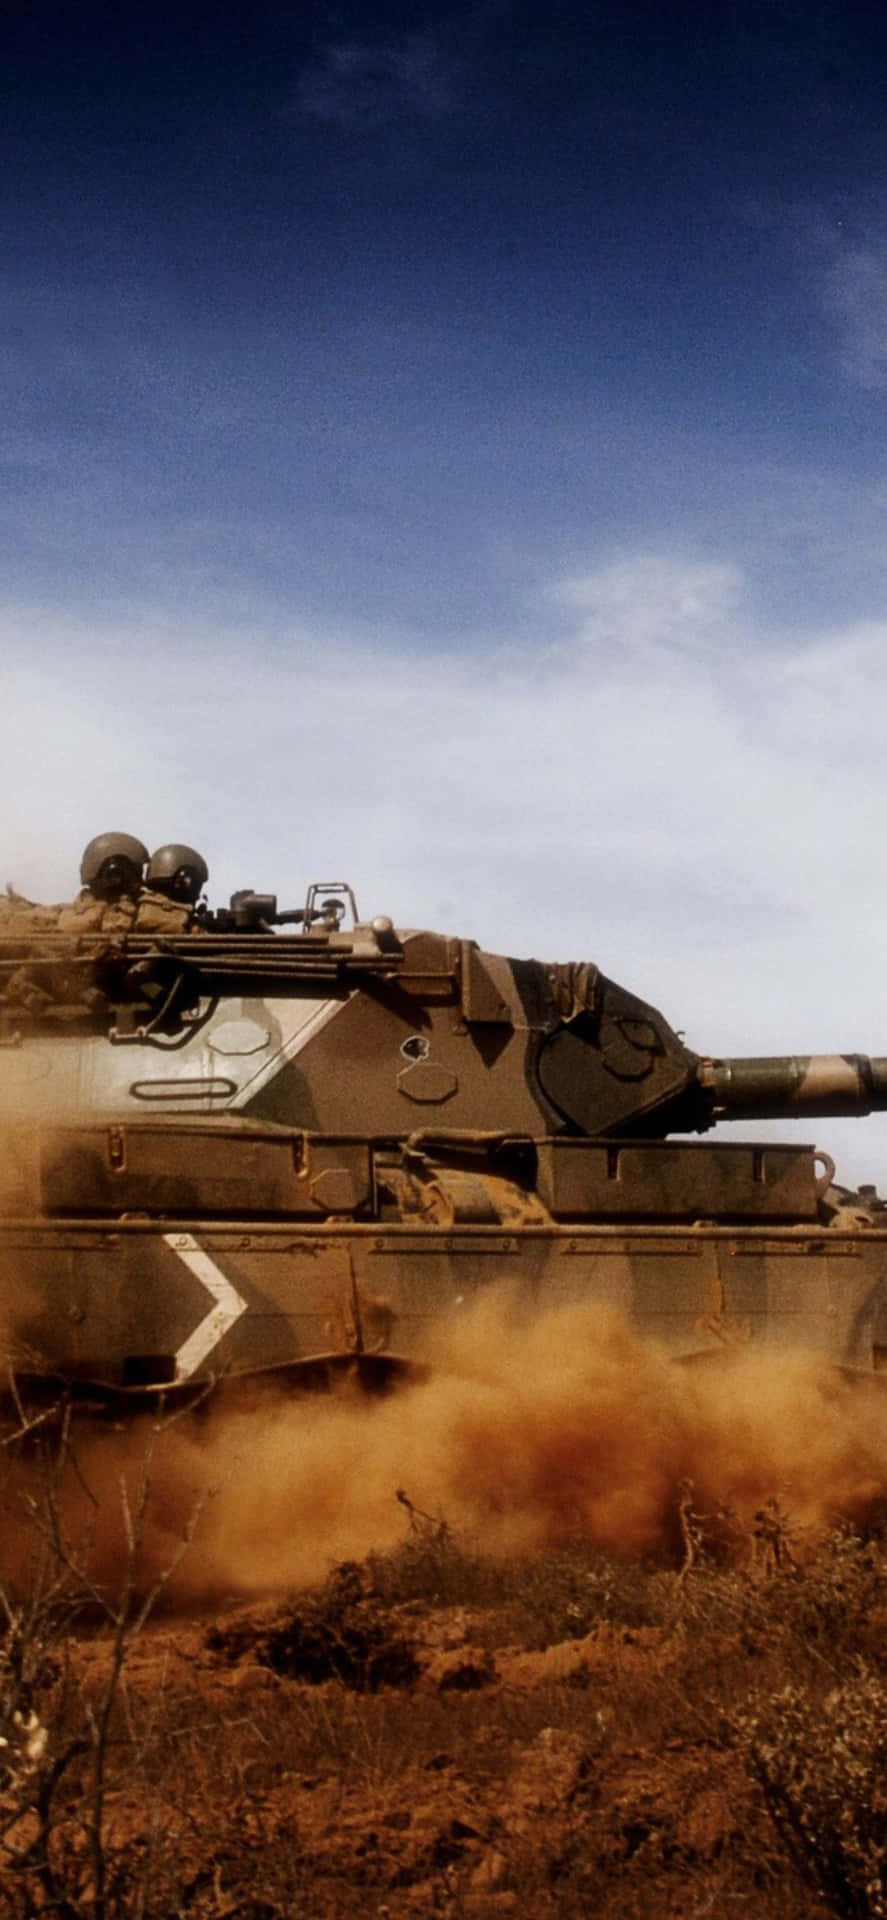 Wallpaper m1 Abrams, Tank, Armored Car, Military, Soldier, Background -  Download Free Image